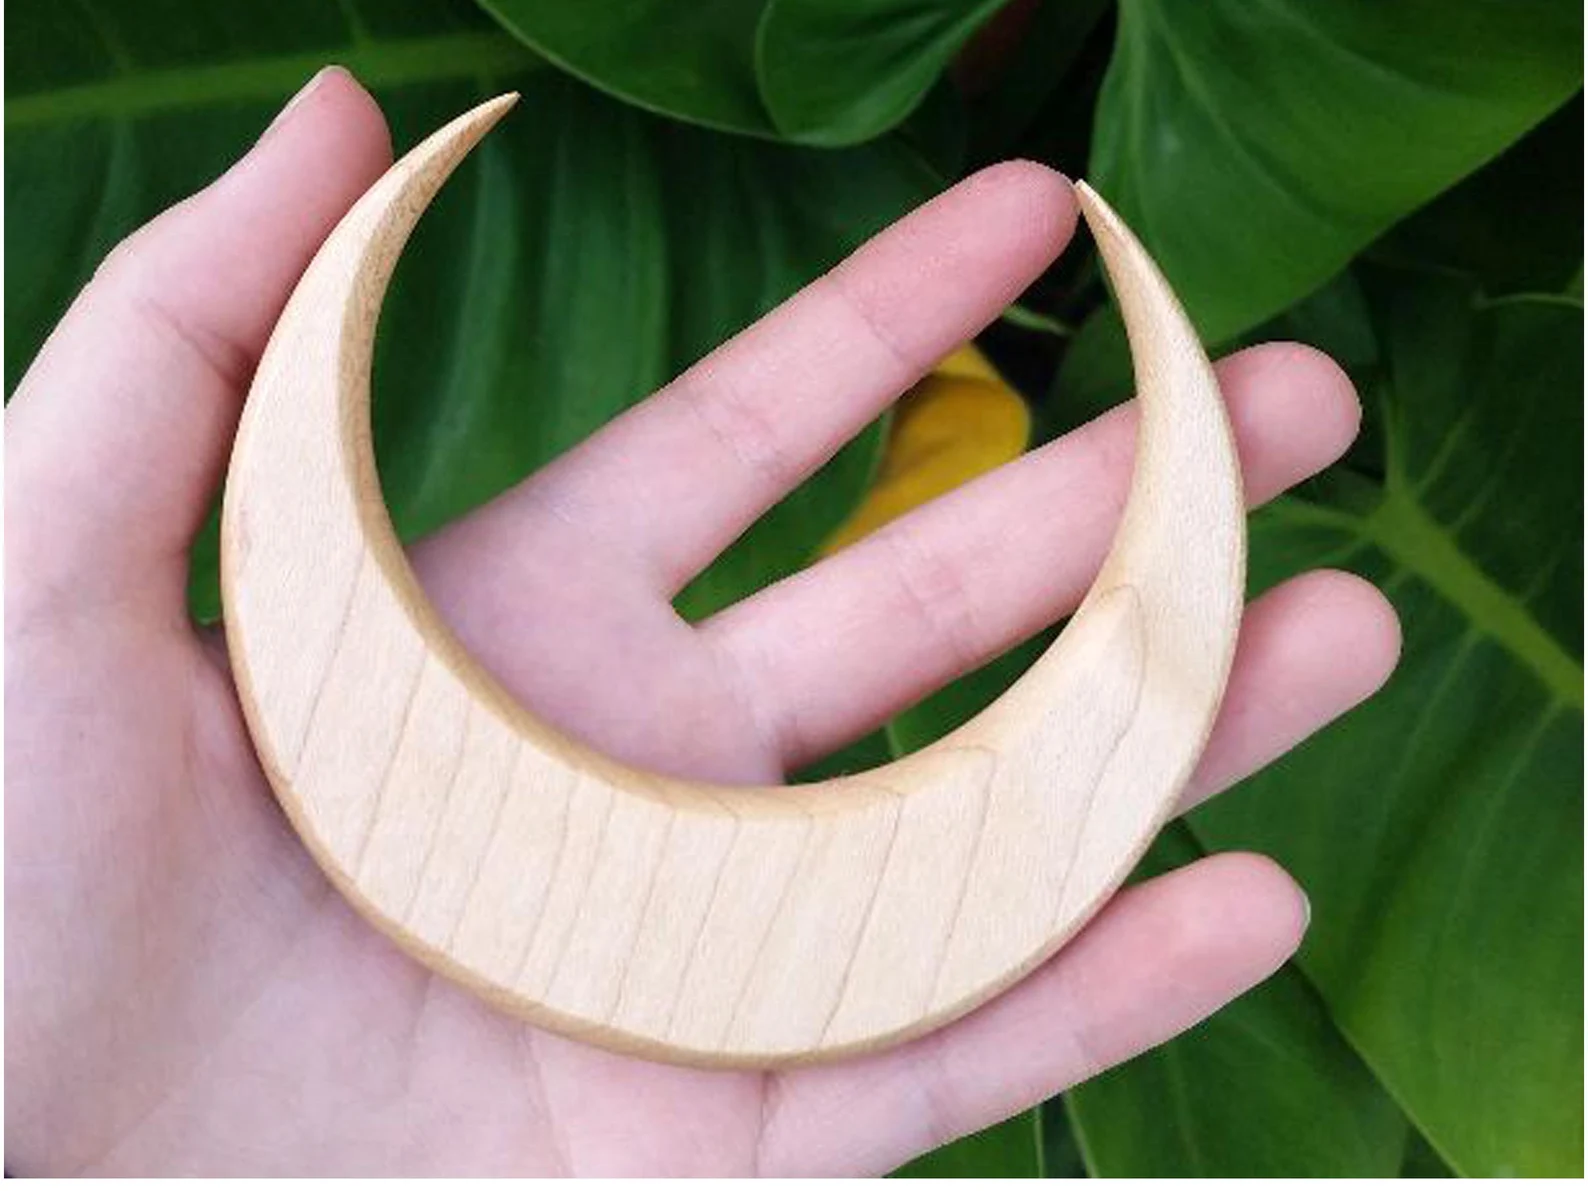 Hair Stick - Crescent Moon in Maple